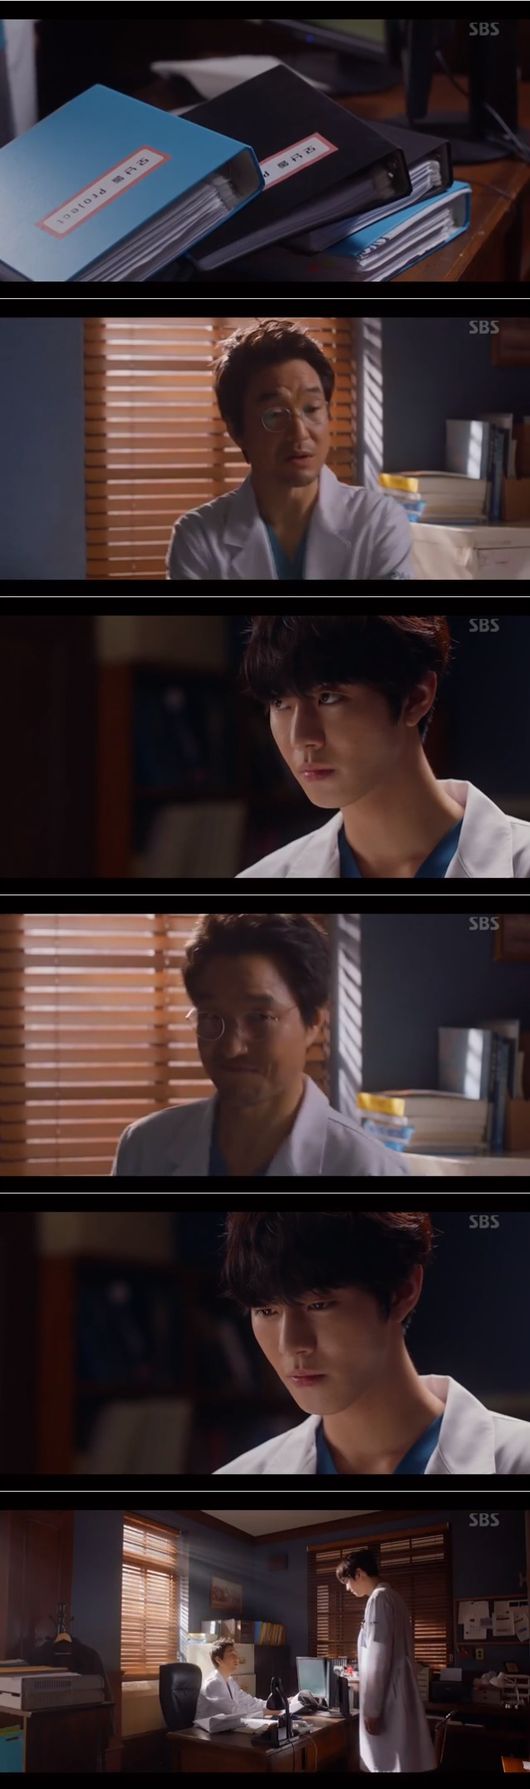 Lee Sung-kyung has been struggling with Han Suk-kyu and Lee Sung-kyung struggling with the presence of Romantic Doctor Kim Sabu 2 Ahn Hyo-seop.In SBS Romantic Doctor Kim Sabu 2, which was broadcast on the afternoon of the 18th, (playplayed by Kang Eun-kyung, directed by Yoo In-sik), Kim Sabu asked Seo Woojin (Ahn Hyo-seop) to become his doctor.Woojin, who says this doesnt change things, was set to scout for Hospital in Seoul.But youre not going to have to leave me with anything in your heart. Two additional questions, this week. So think carefully and ask.There are only two chances, he said, leaving the room. He told Woojin all his symptoms.Cha went through Hospital to meet a scout who came to see Woojin; and there was something to say with Hyunjun.Hyunjun said to Eunjae, who asked if it was because of the Hyunjun, who moved to Seoul, because of the money, and Yang Ho-joon, who was watching it, said, What are you doing now?Did you sleep with her? Its a small rumor. Youre good. Hearing this, Eun-jae hit him in the back of the head and said, Its you who beat me more meanly than the fist.No, now I have Yang Ho-joon. Park called Wujin and asked him to enter the surgery.Woojin signed the contract to the Republic of Korea and told him that he could be at Hospital until today, and left a request to adjust it to this week.Kim remembered that the deadline given by Kim Sabu was this week. I have to see the progress of the patient who operated today. He said that the Republic of Korea would adjust the date.Kim Sa-bu went after Hyunjun.When Kim Sabu said, If I sell my family and my juniors are all worthy of money, I am conscience, nabal, and selling everything, he said, Hyunjun tried to do it.Kim said that he should not confuse conscience and greed, and turned his back with the words poor young.Eunjae told Woojin not to miss me, and soon he grabbed him to ask the stone wall Hospital for bones together.Woojin asked, What if you do this and I really cross the line? And Woojin left the place with a frozen silver.Jung In-soo was in the bathroom, thinking about a work contract, a paper by Won-young Hospital, and when he was worried and missed the paper, Park Eun-tak picked up the paper.The two of them get a call from the emergency room and then they go out.You really cant, I was going to release the boycott, but you have to rot more in this rural hospital. Kim Sabus sting was dirty.Youll live right because Ill leave you behind. Show me, you little bastard. He left the hospital.The silver, who knew nothing, was peeking into the room where Woojin was packing; the silver, which he kept his cell phone hidden from him.I am sorry for the inconvenience and the mischief, and I paid the principal and interest well.Ushijima the Loan Shark left him a greeting of Goodbye and left the hospital.He was smiling at his appearance as if he knew something, but Eun-jae thought it was all the power of his gangsters.Outside the door, the gangsters were lined up, and the gangsters began to scare the Ushijima the Loan Shark, despite the words I do not apologize for you.Eunjae, who was looking at it from afar, looked at the gangsters and greeted them at once.The Republic of Korea received a call from Chairman Do Yun-wan. Asked about the table death, he asked if Sejin Group chairman knew.He said he was important to us, but he said he would take responsibility for making things a matter of business.He threw another trick at him, saying that what Im saying now could be the last way to get out alive.SBS Romantic Doctor Kim Sabu 2 captures broadcast screen